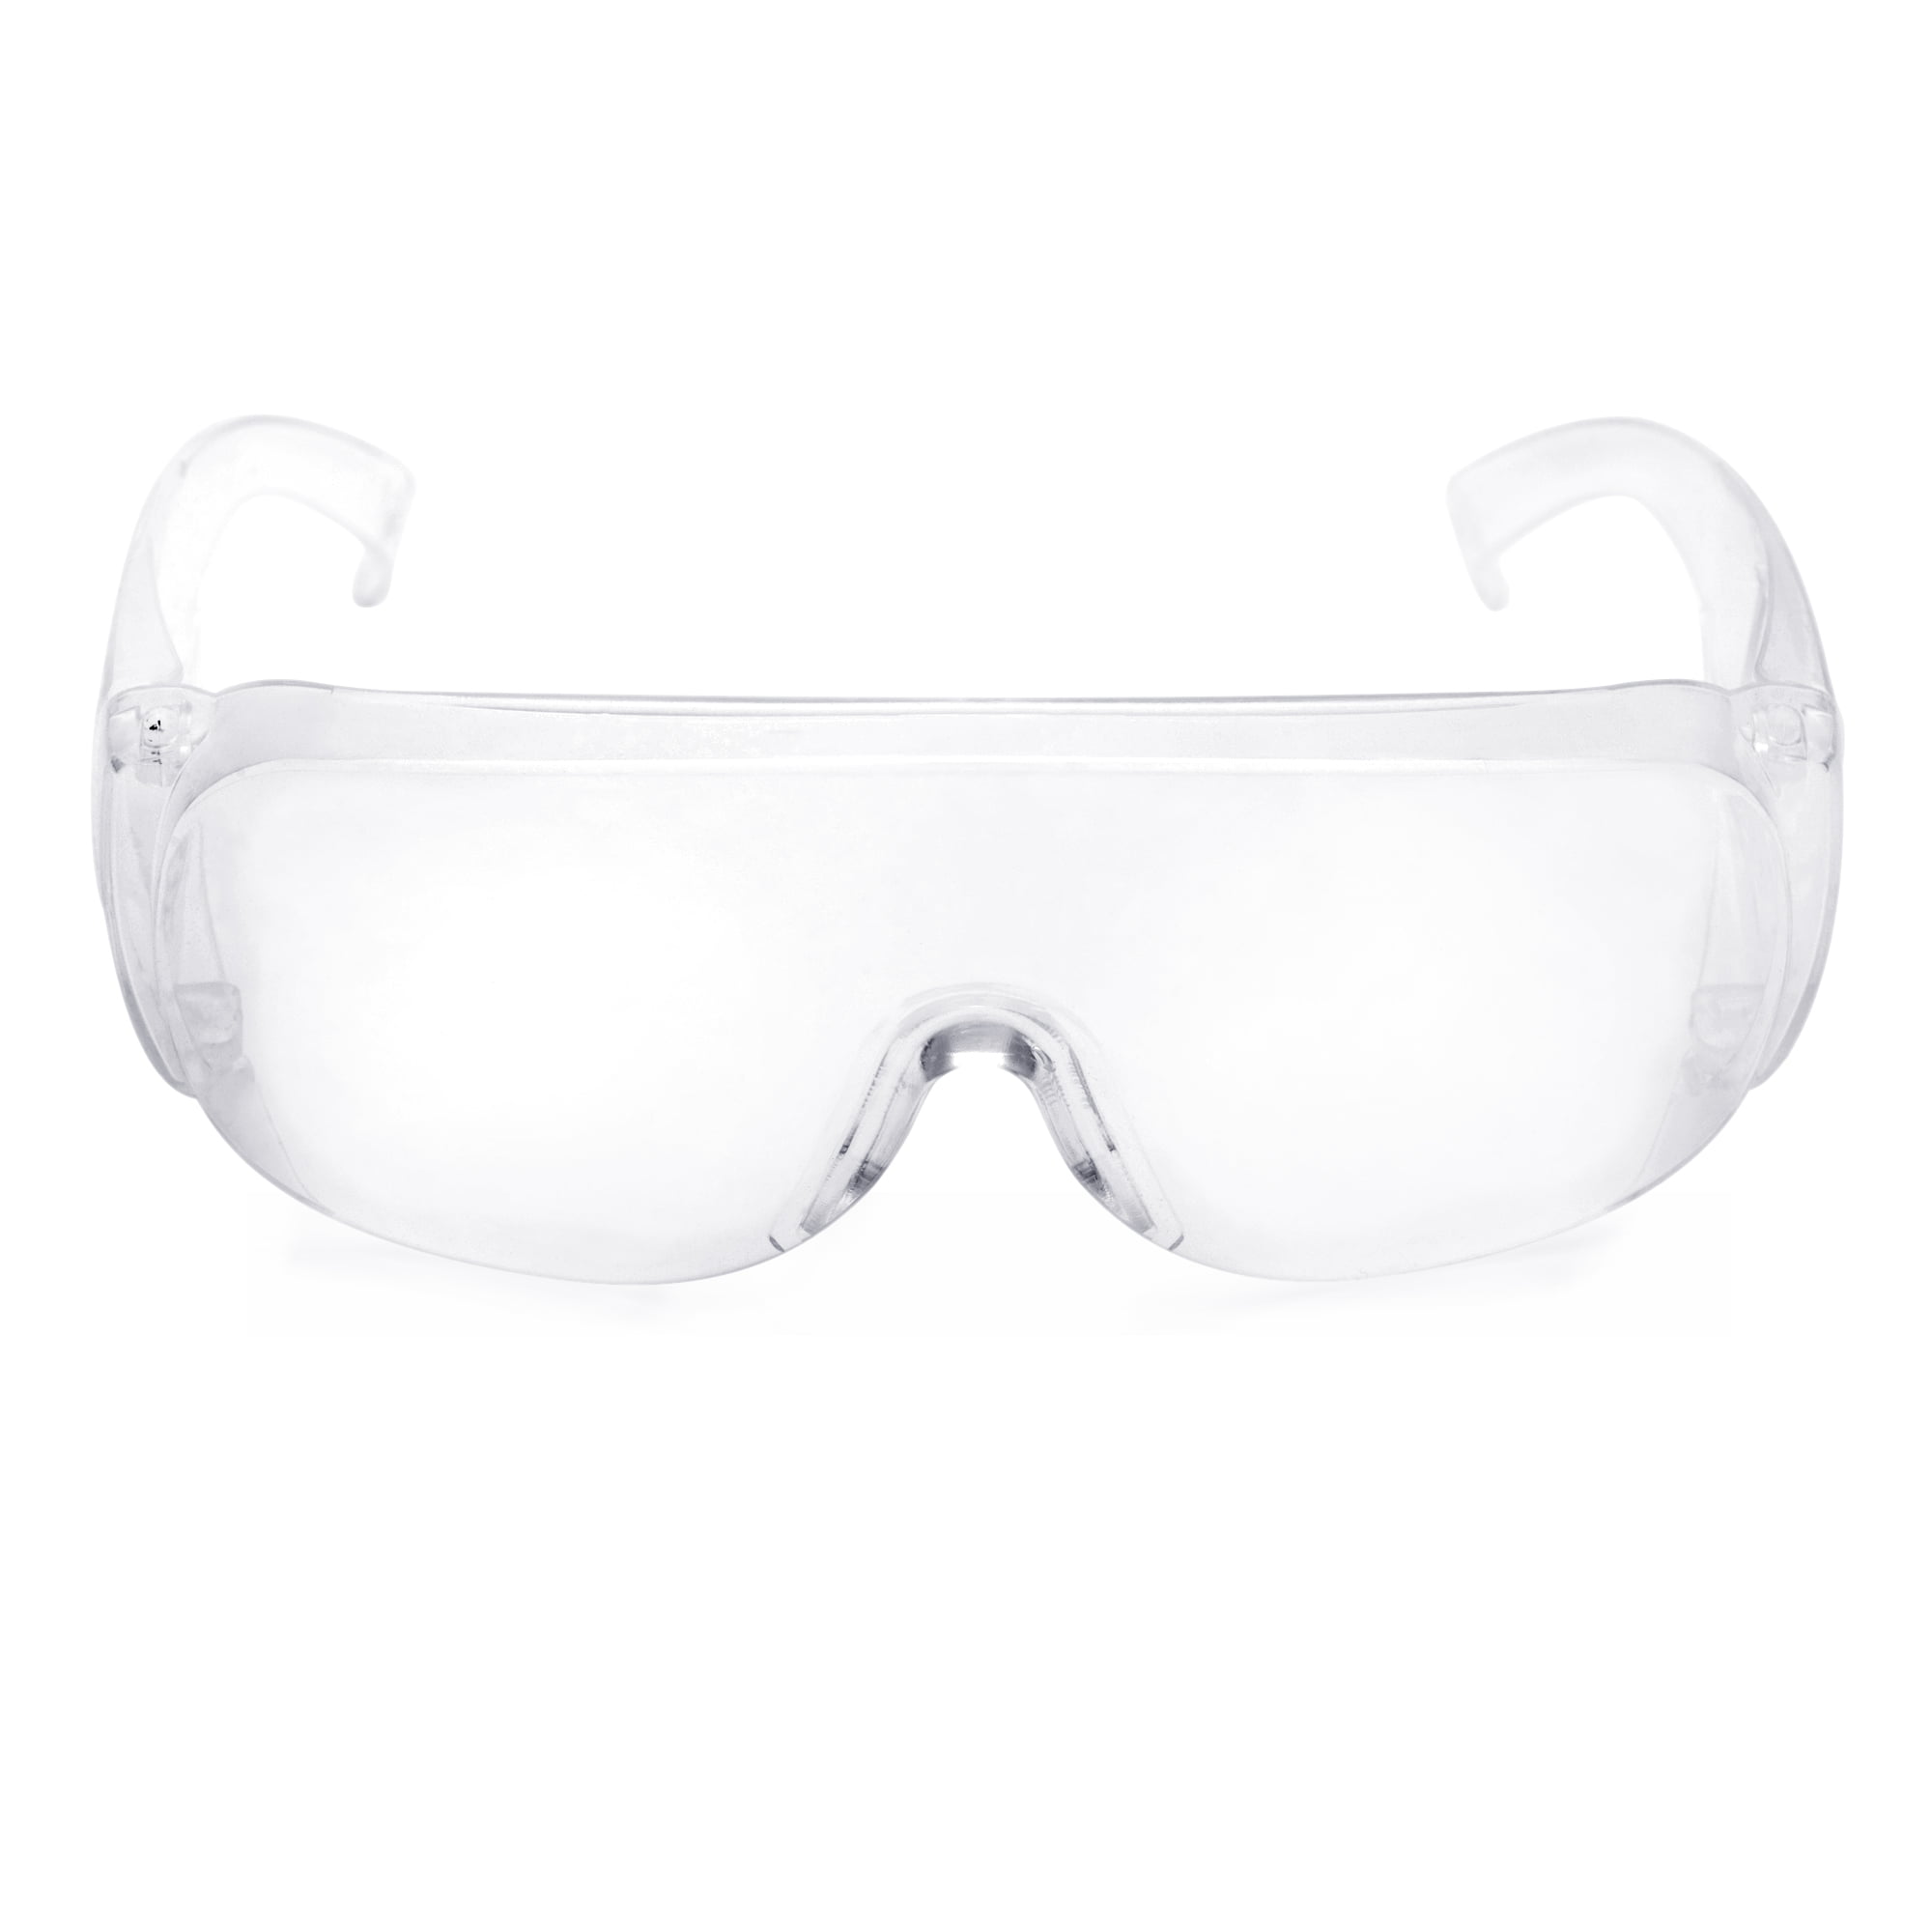 3Pcs Protective Safety Work Goggles Glasses with Clear Lenses for Eye Full Protection